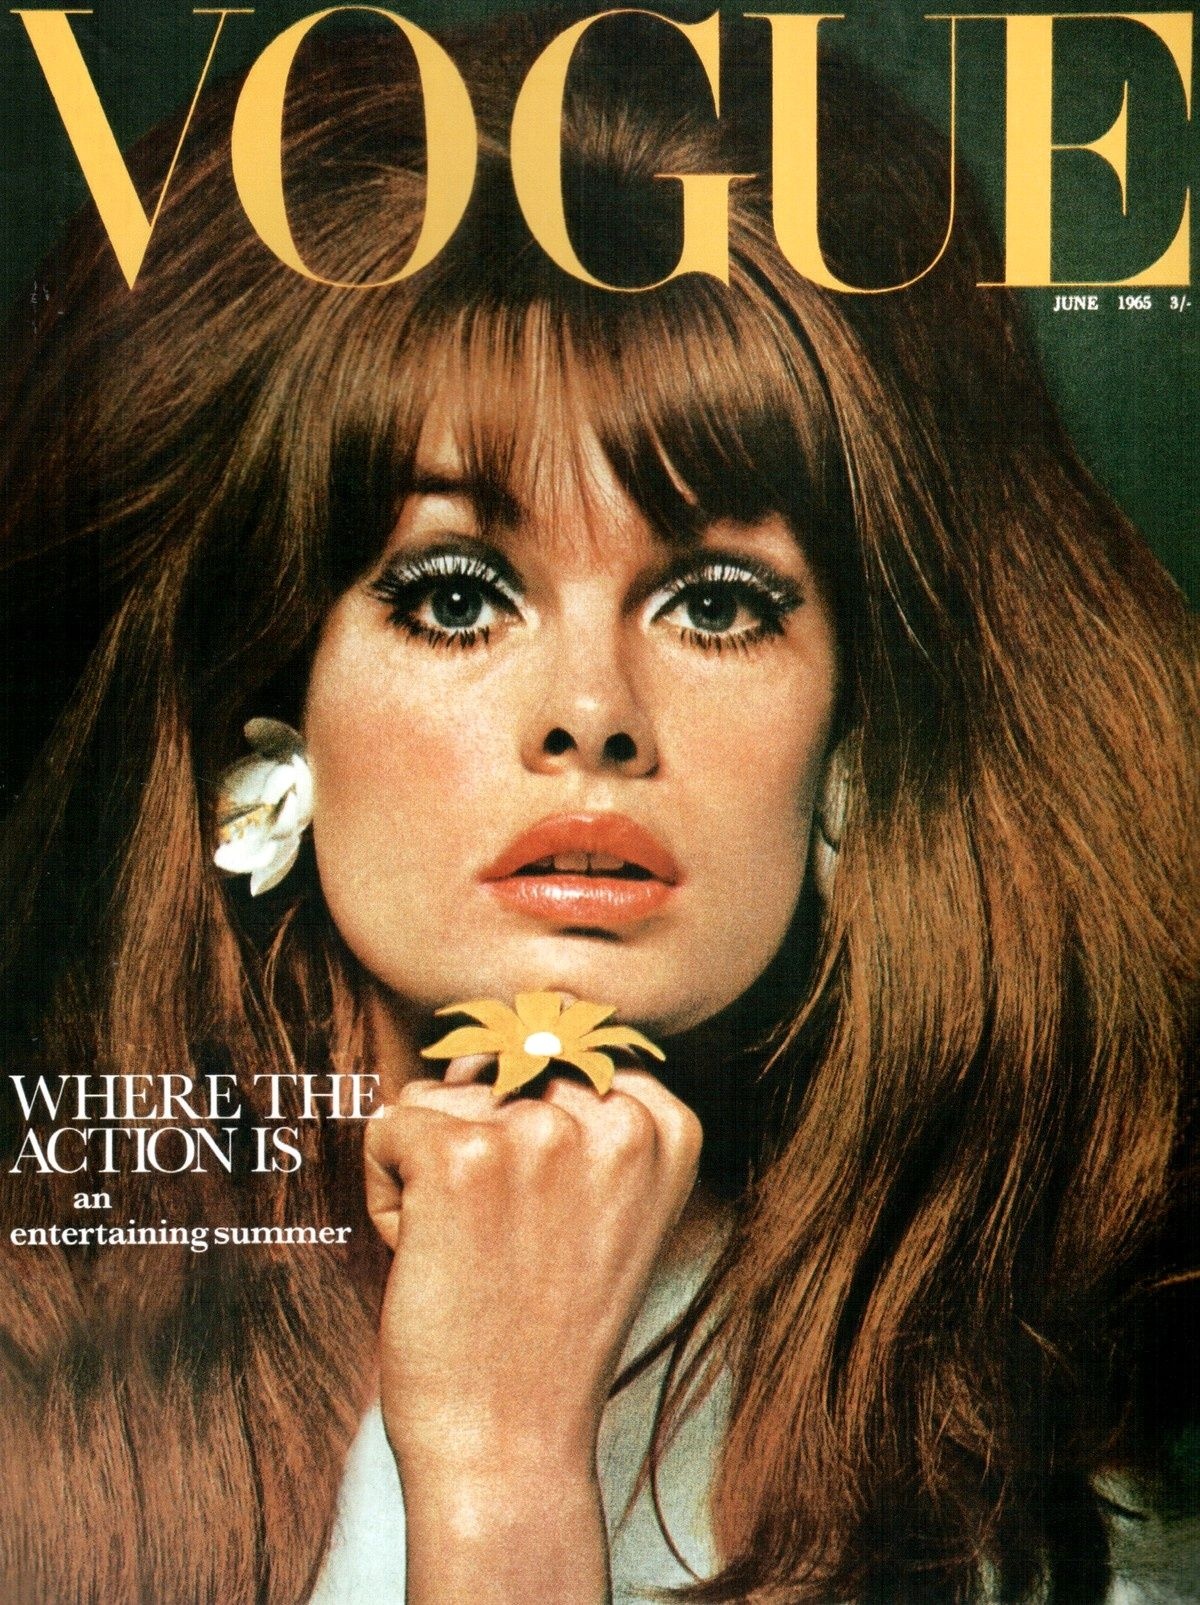 451. June, 1965 1159 British Vogue Covers History of Fashion (Images)